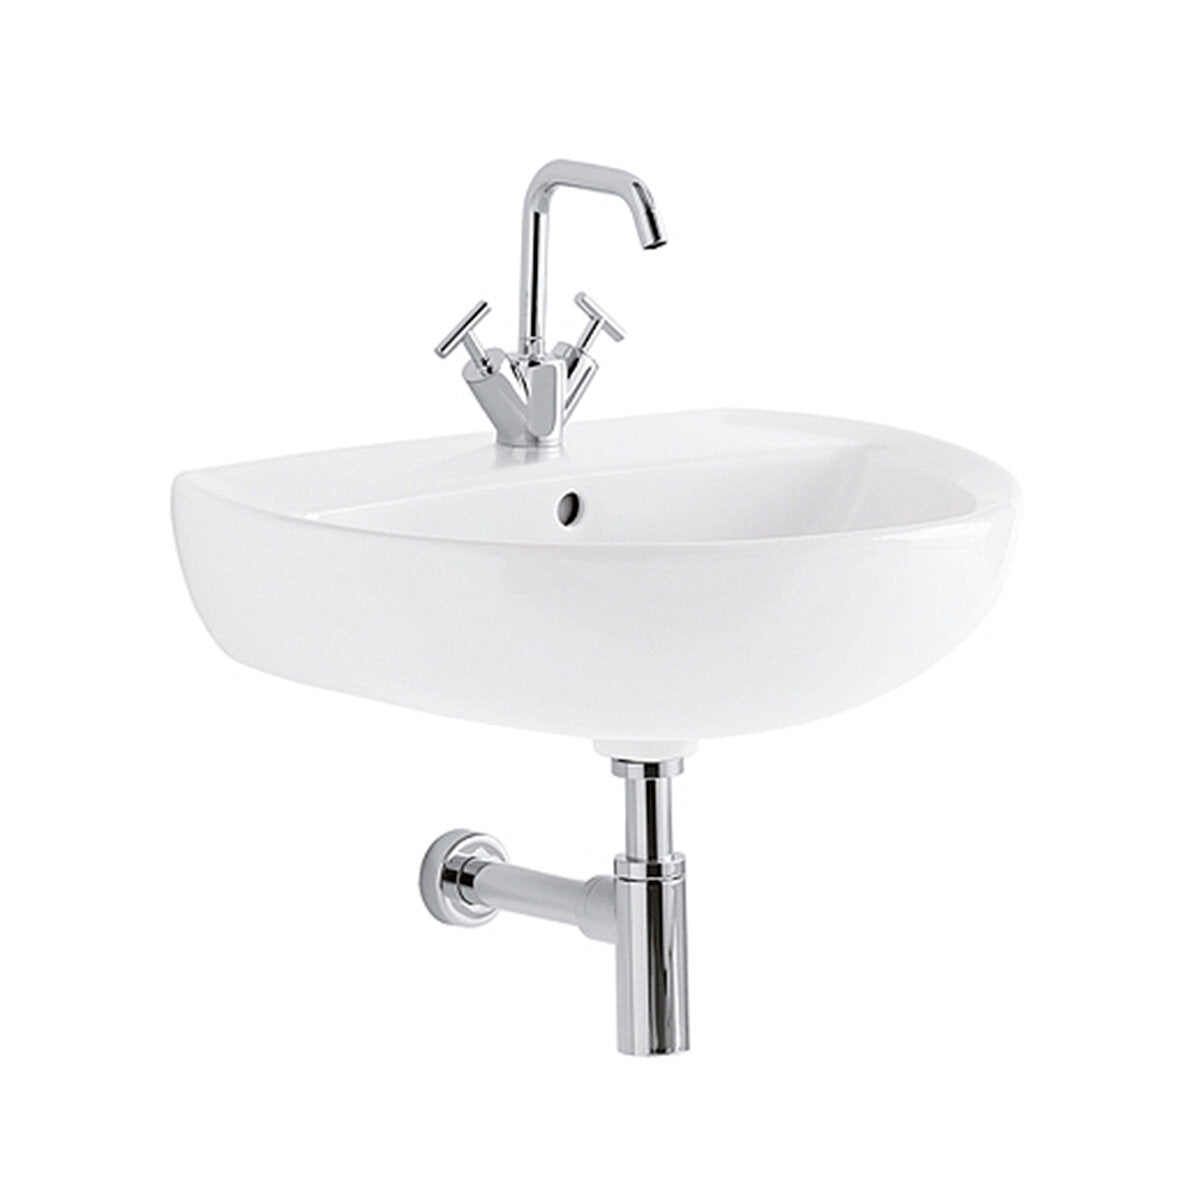 Geberit Colibrì 55 cm single hole wall-mounted washbasin in glossy white